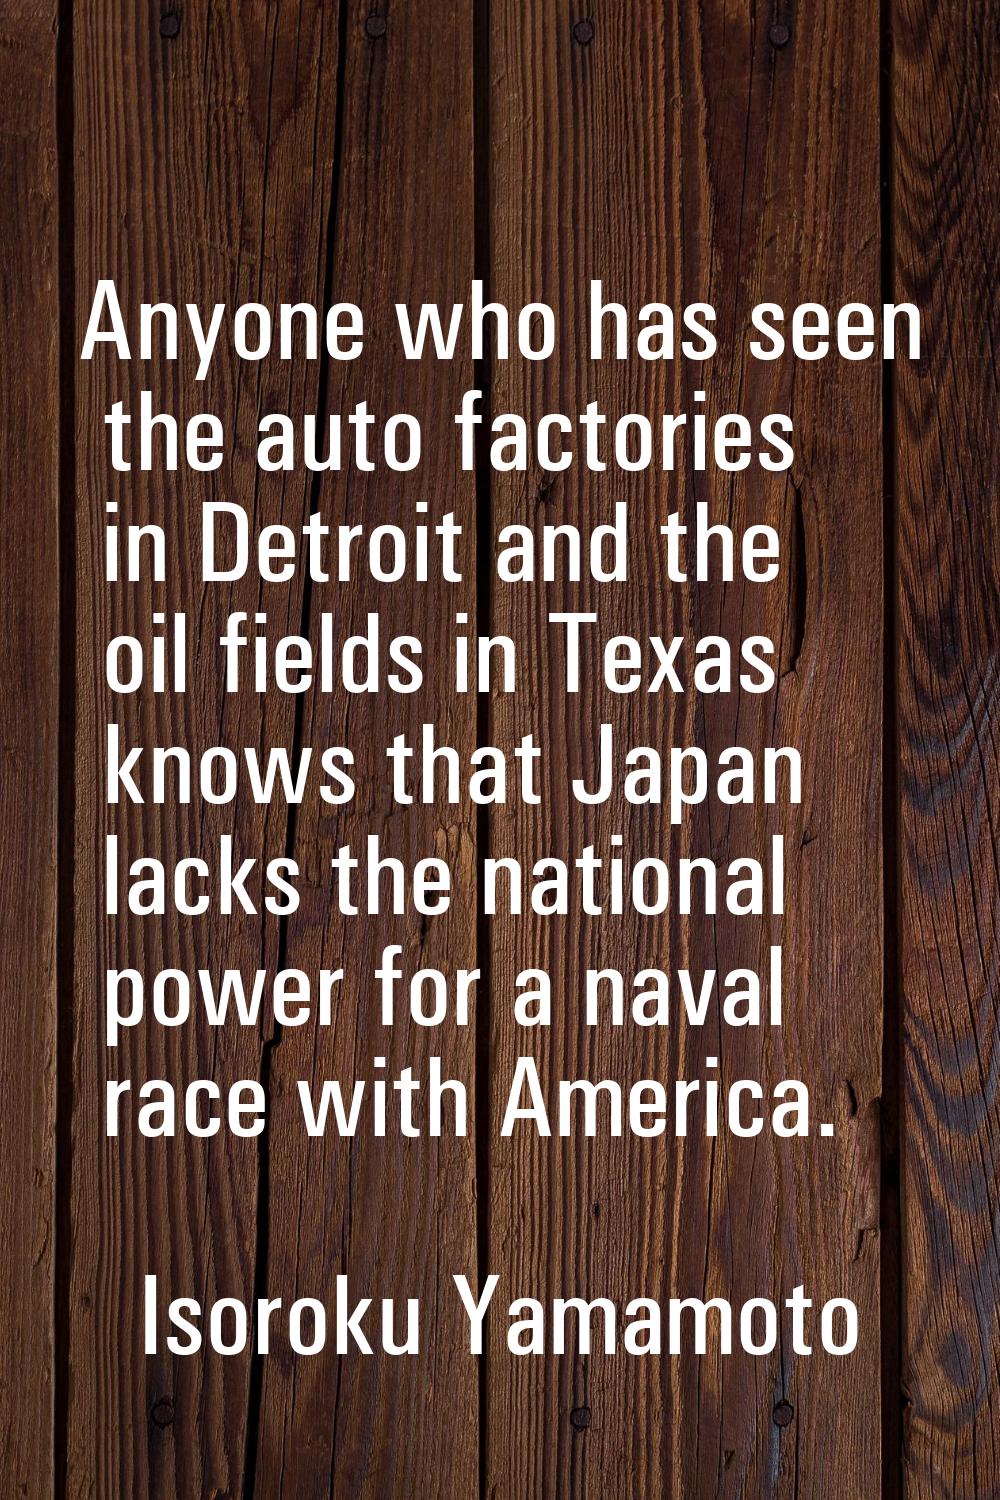 Anyone who has seen the auto factories in Detroit and the oil fields in Texas knows that Japan lack